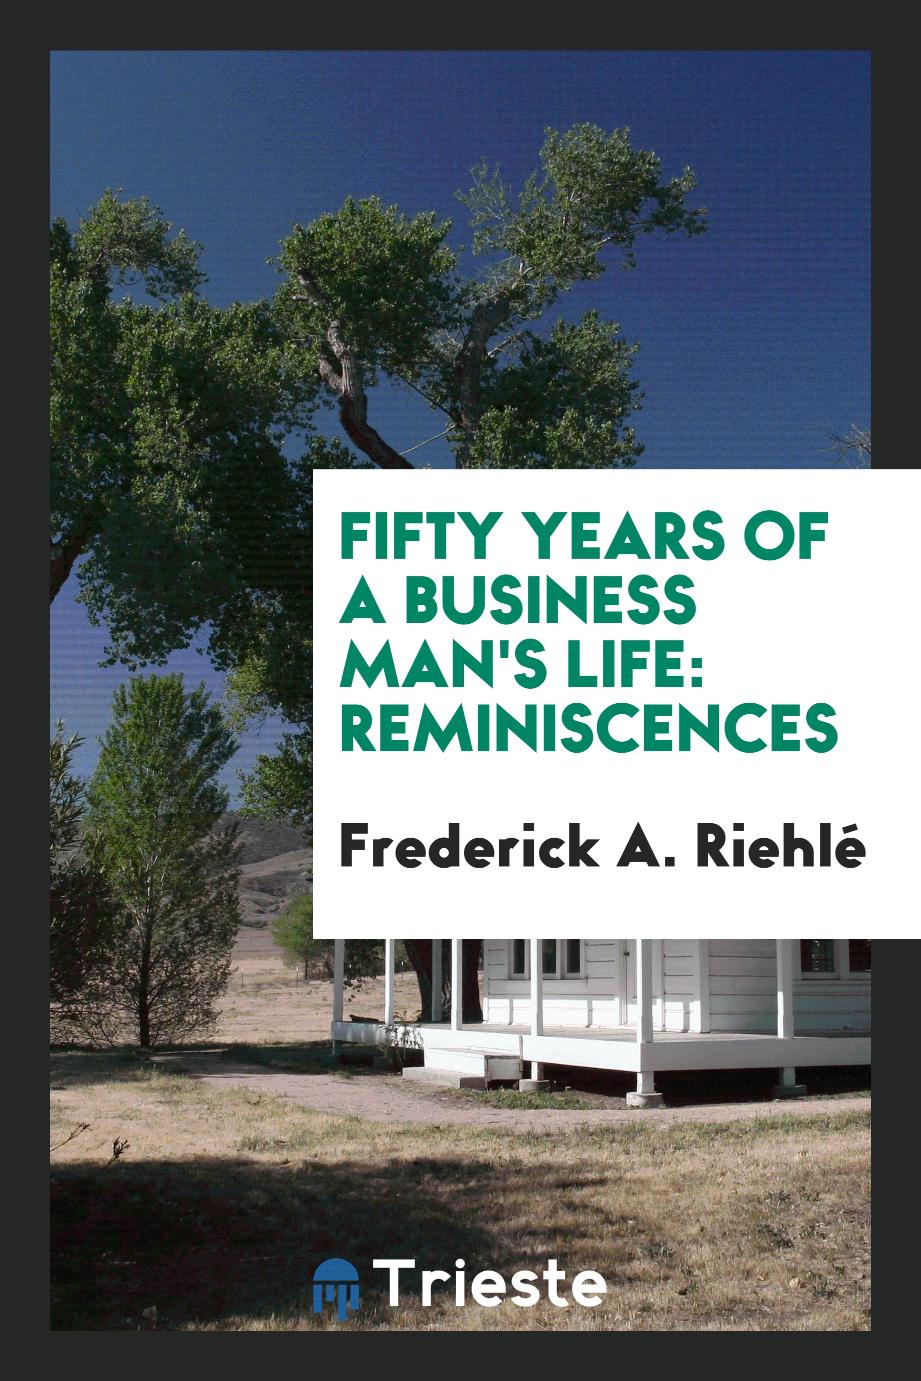 Fifty Years of a Business Man's Life: Reminiscences